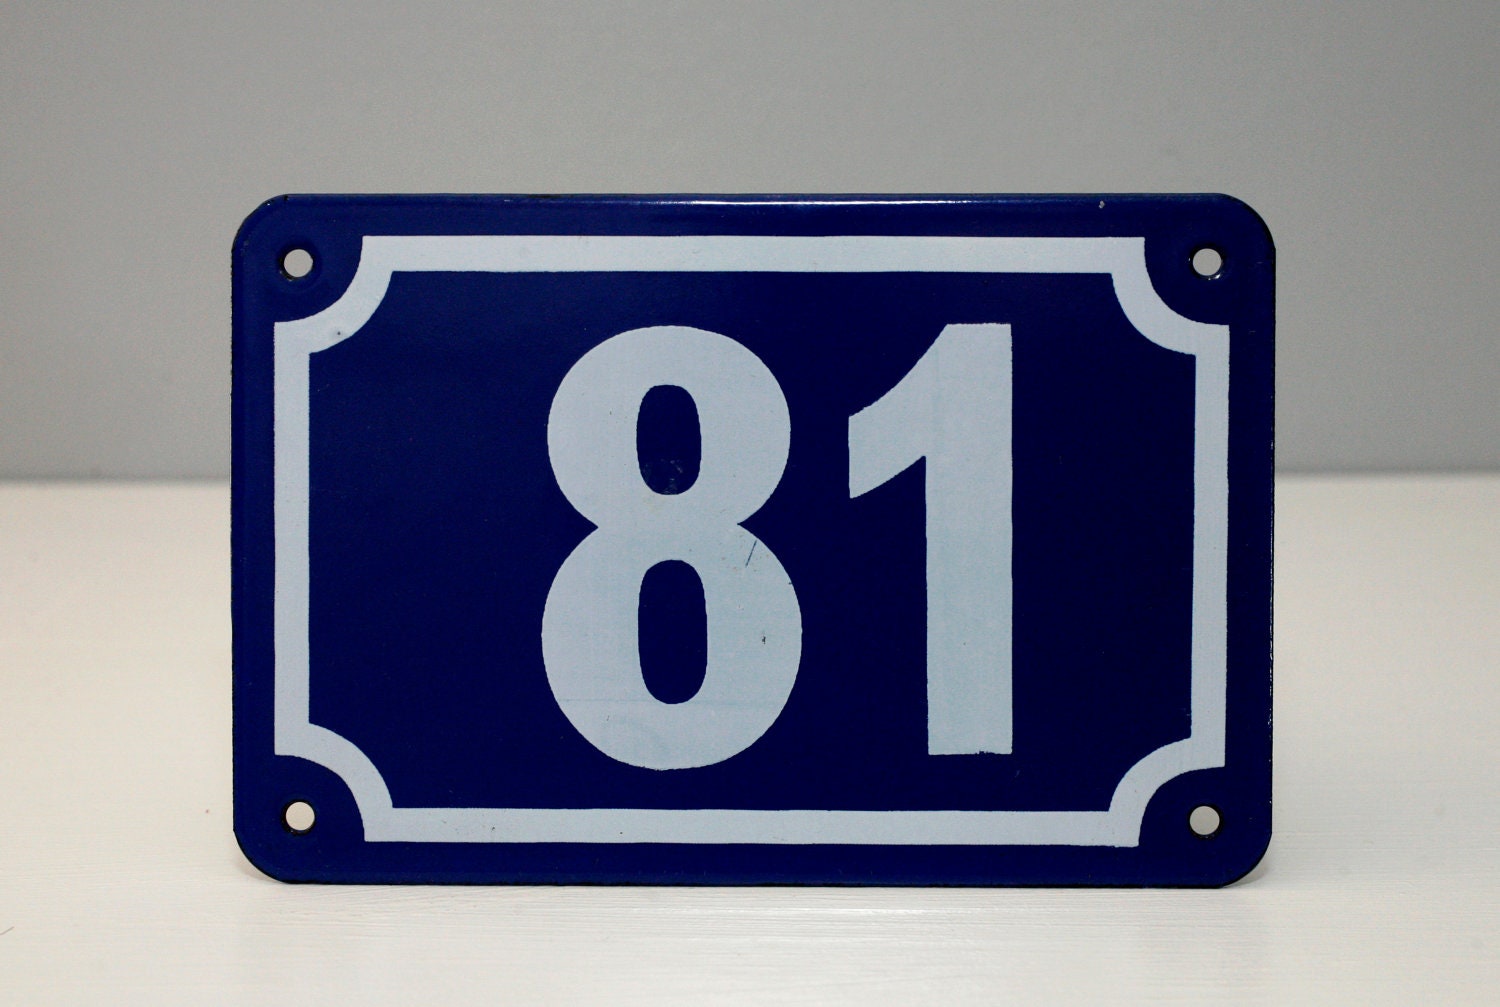 VINTAGE Enamel House Number, made by Garnier Signs, London. Iconic European Style in Royal Blue, Number 81